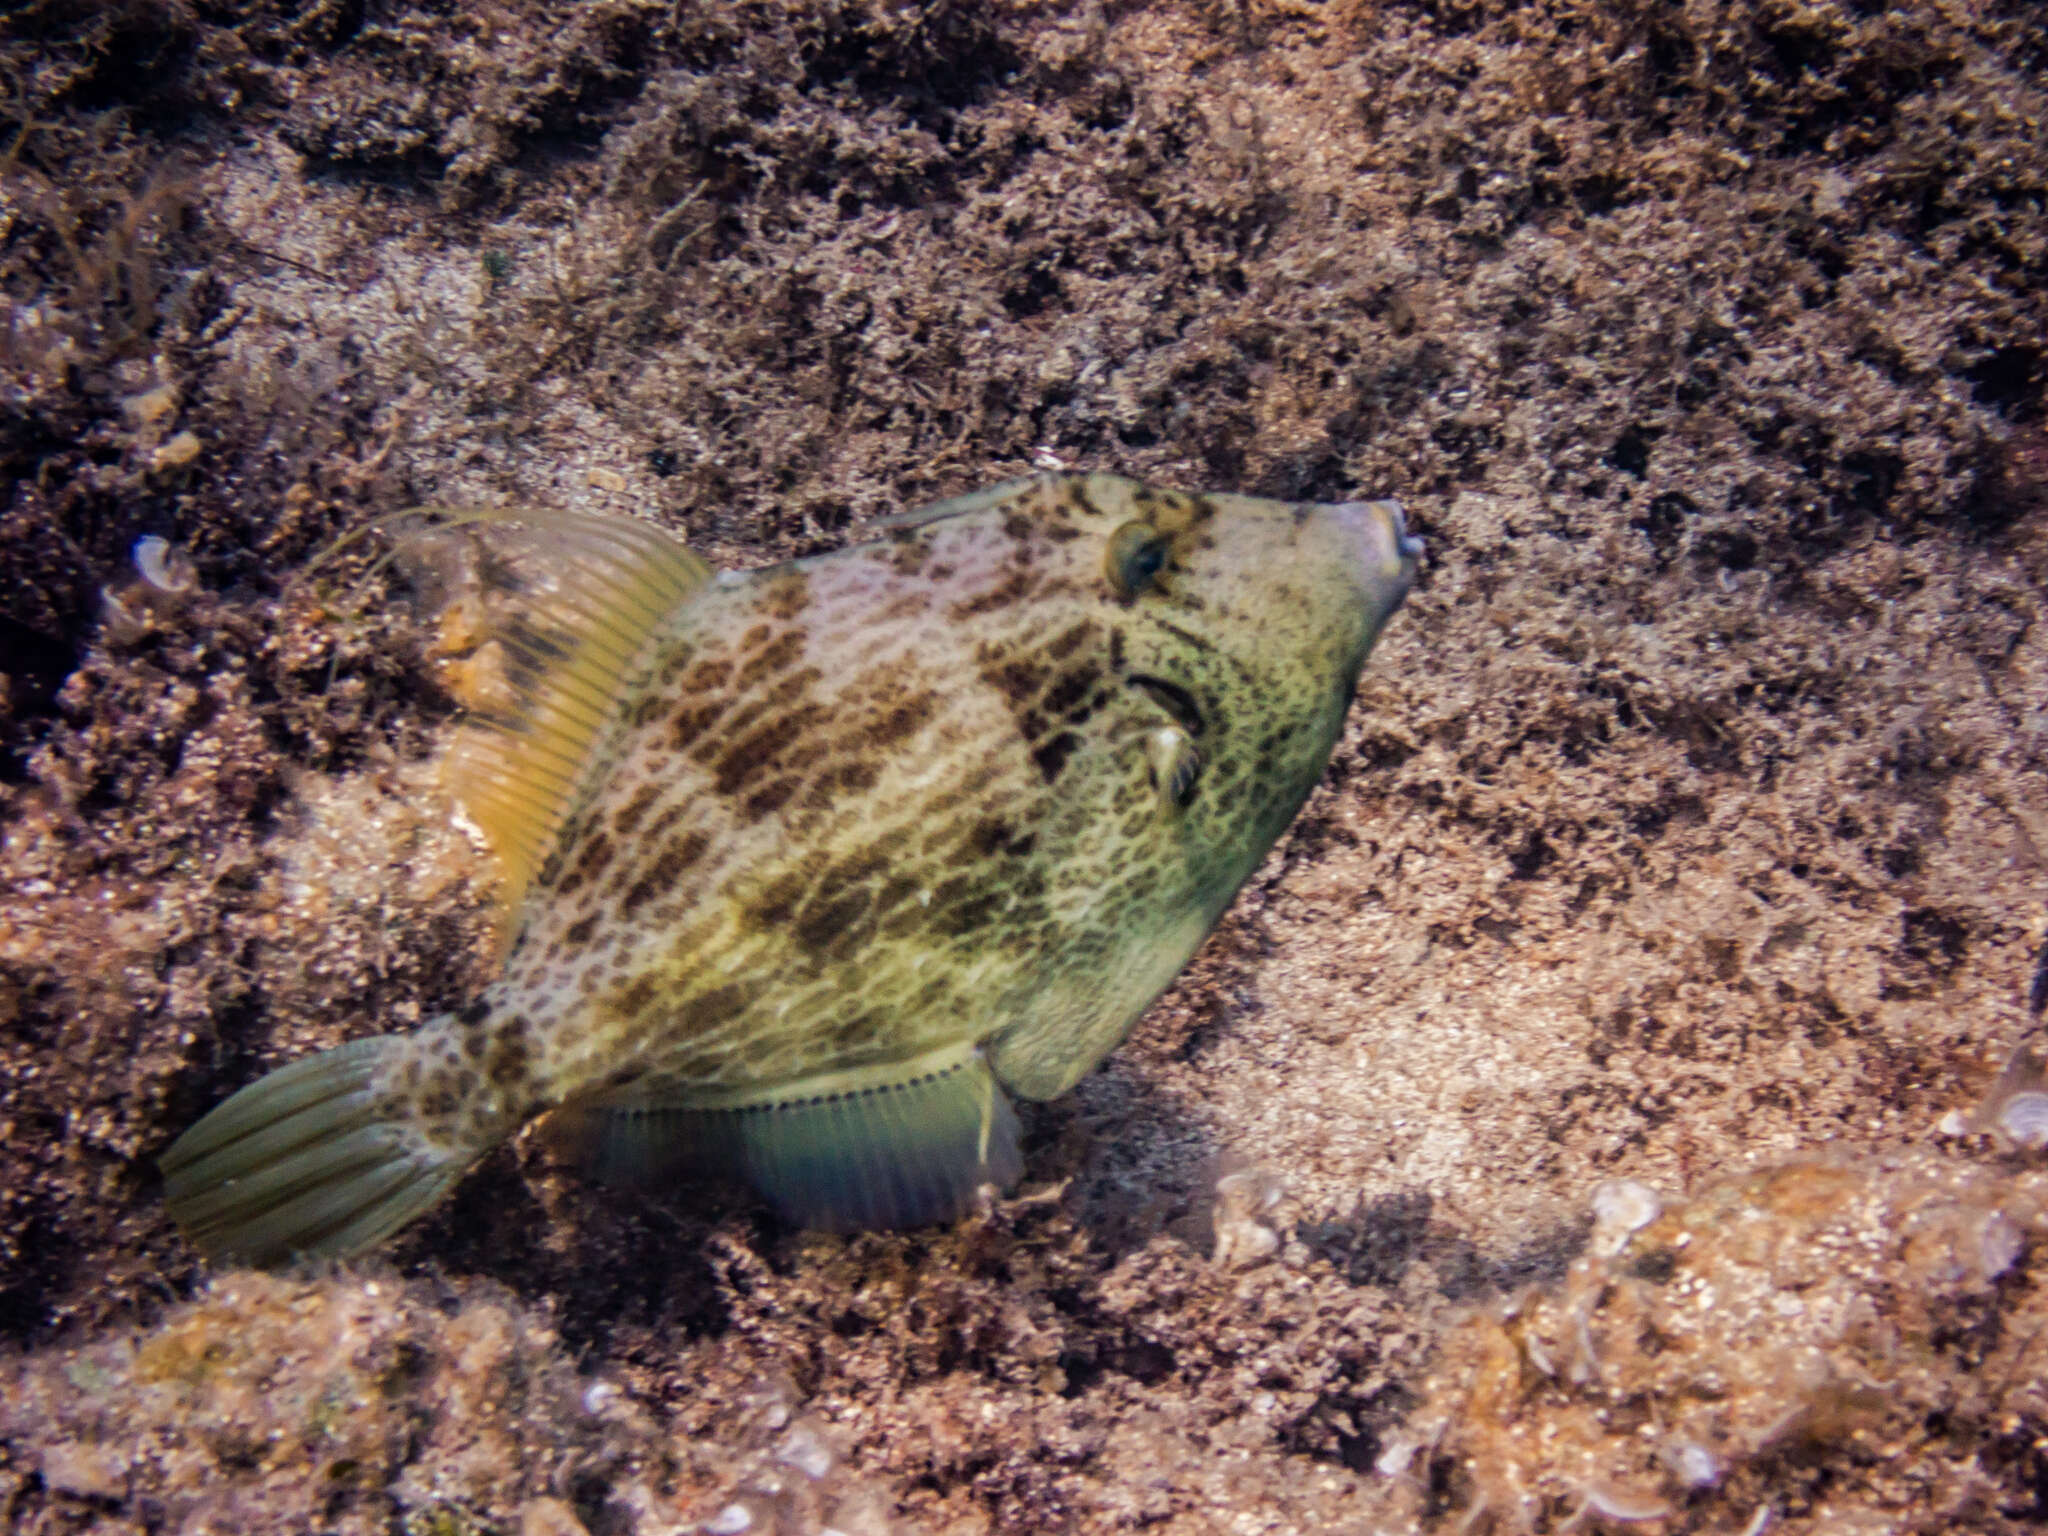 Image of Reticulated leatherjacket